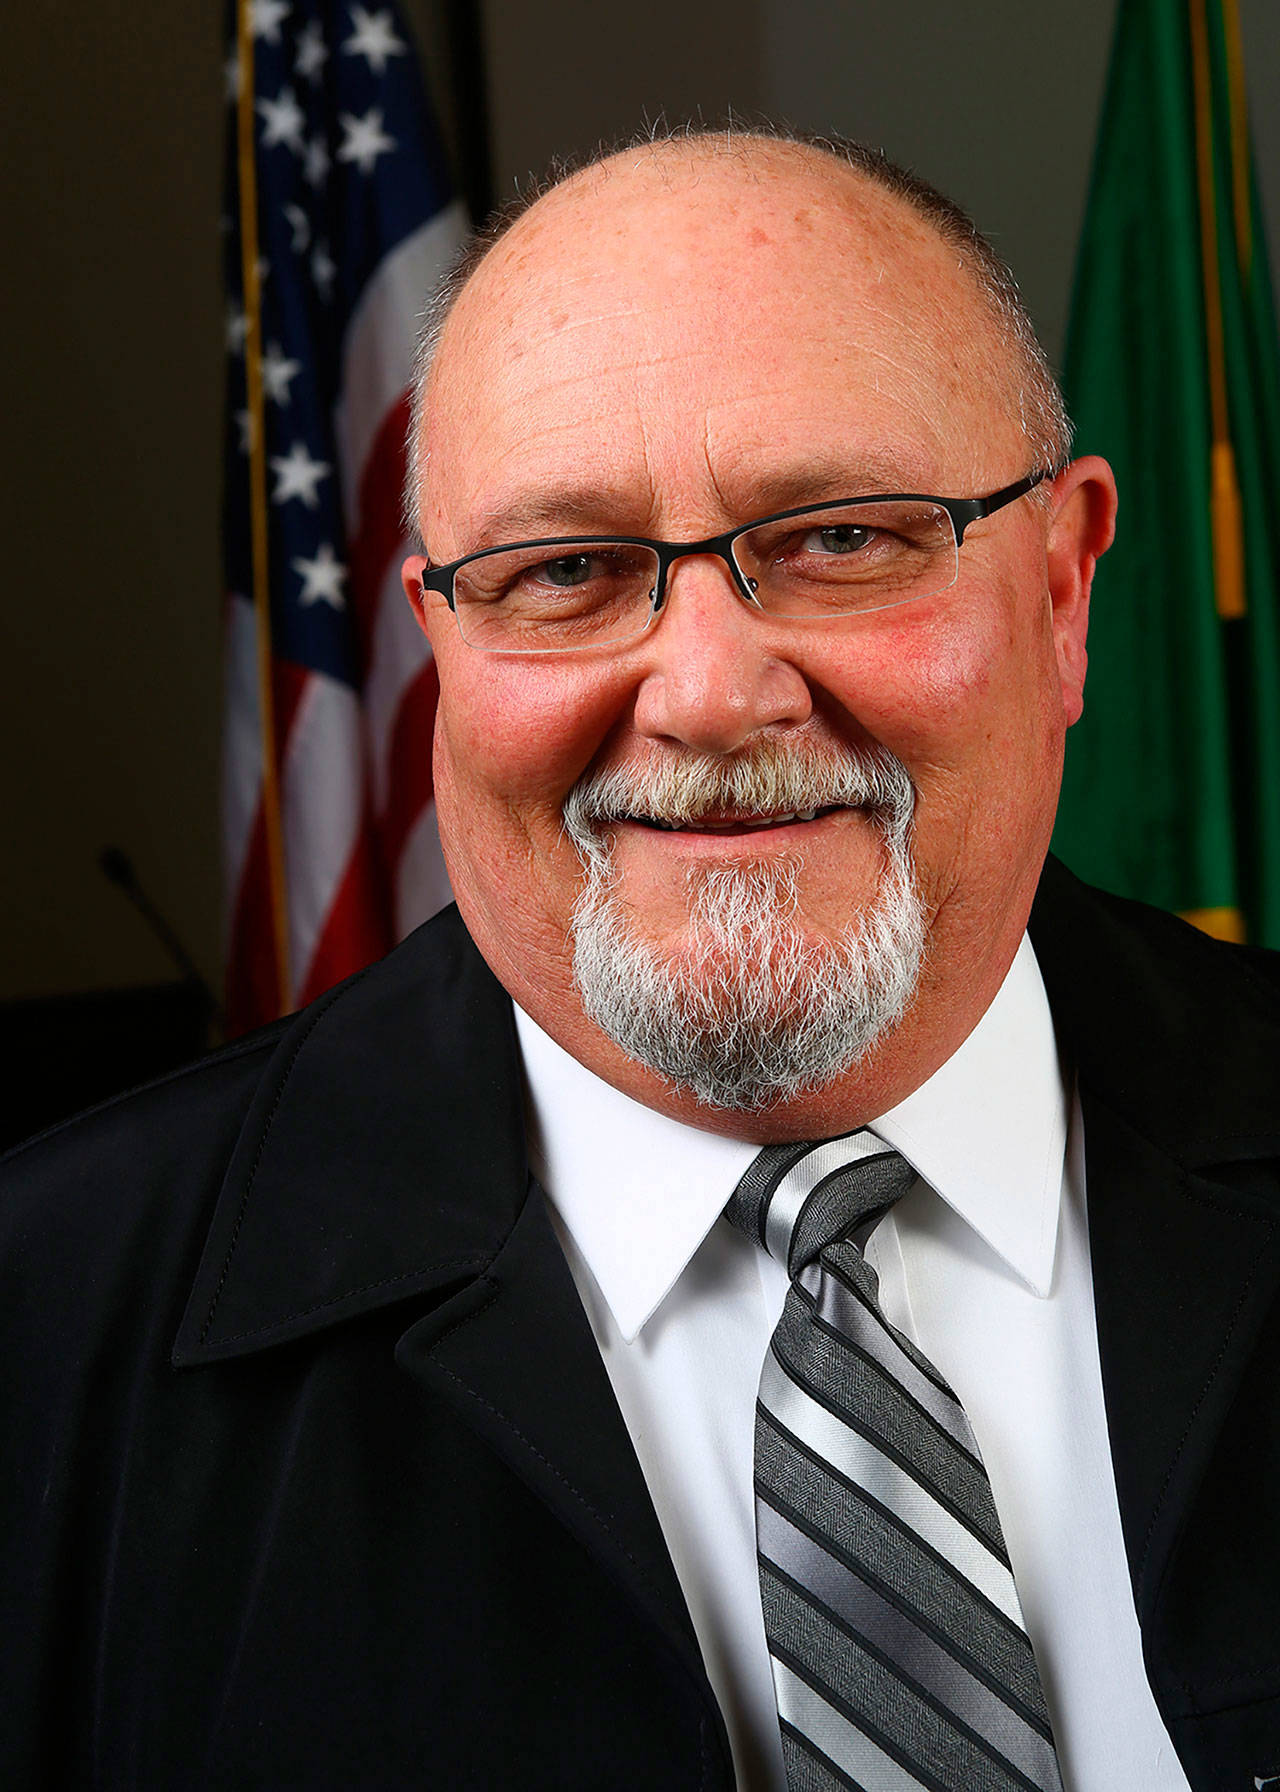 Per state law, staff with the City of Sequim must seek someone by the end of February to fill the seat of former city councilor John Miller who died on Nov. 29. He’s remembered for his sense of humor and passion for the community. Photo courtesy City of Sequim